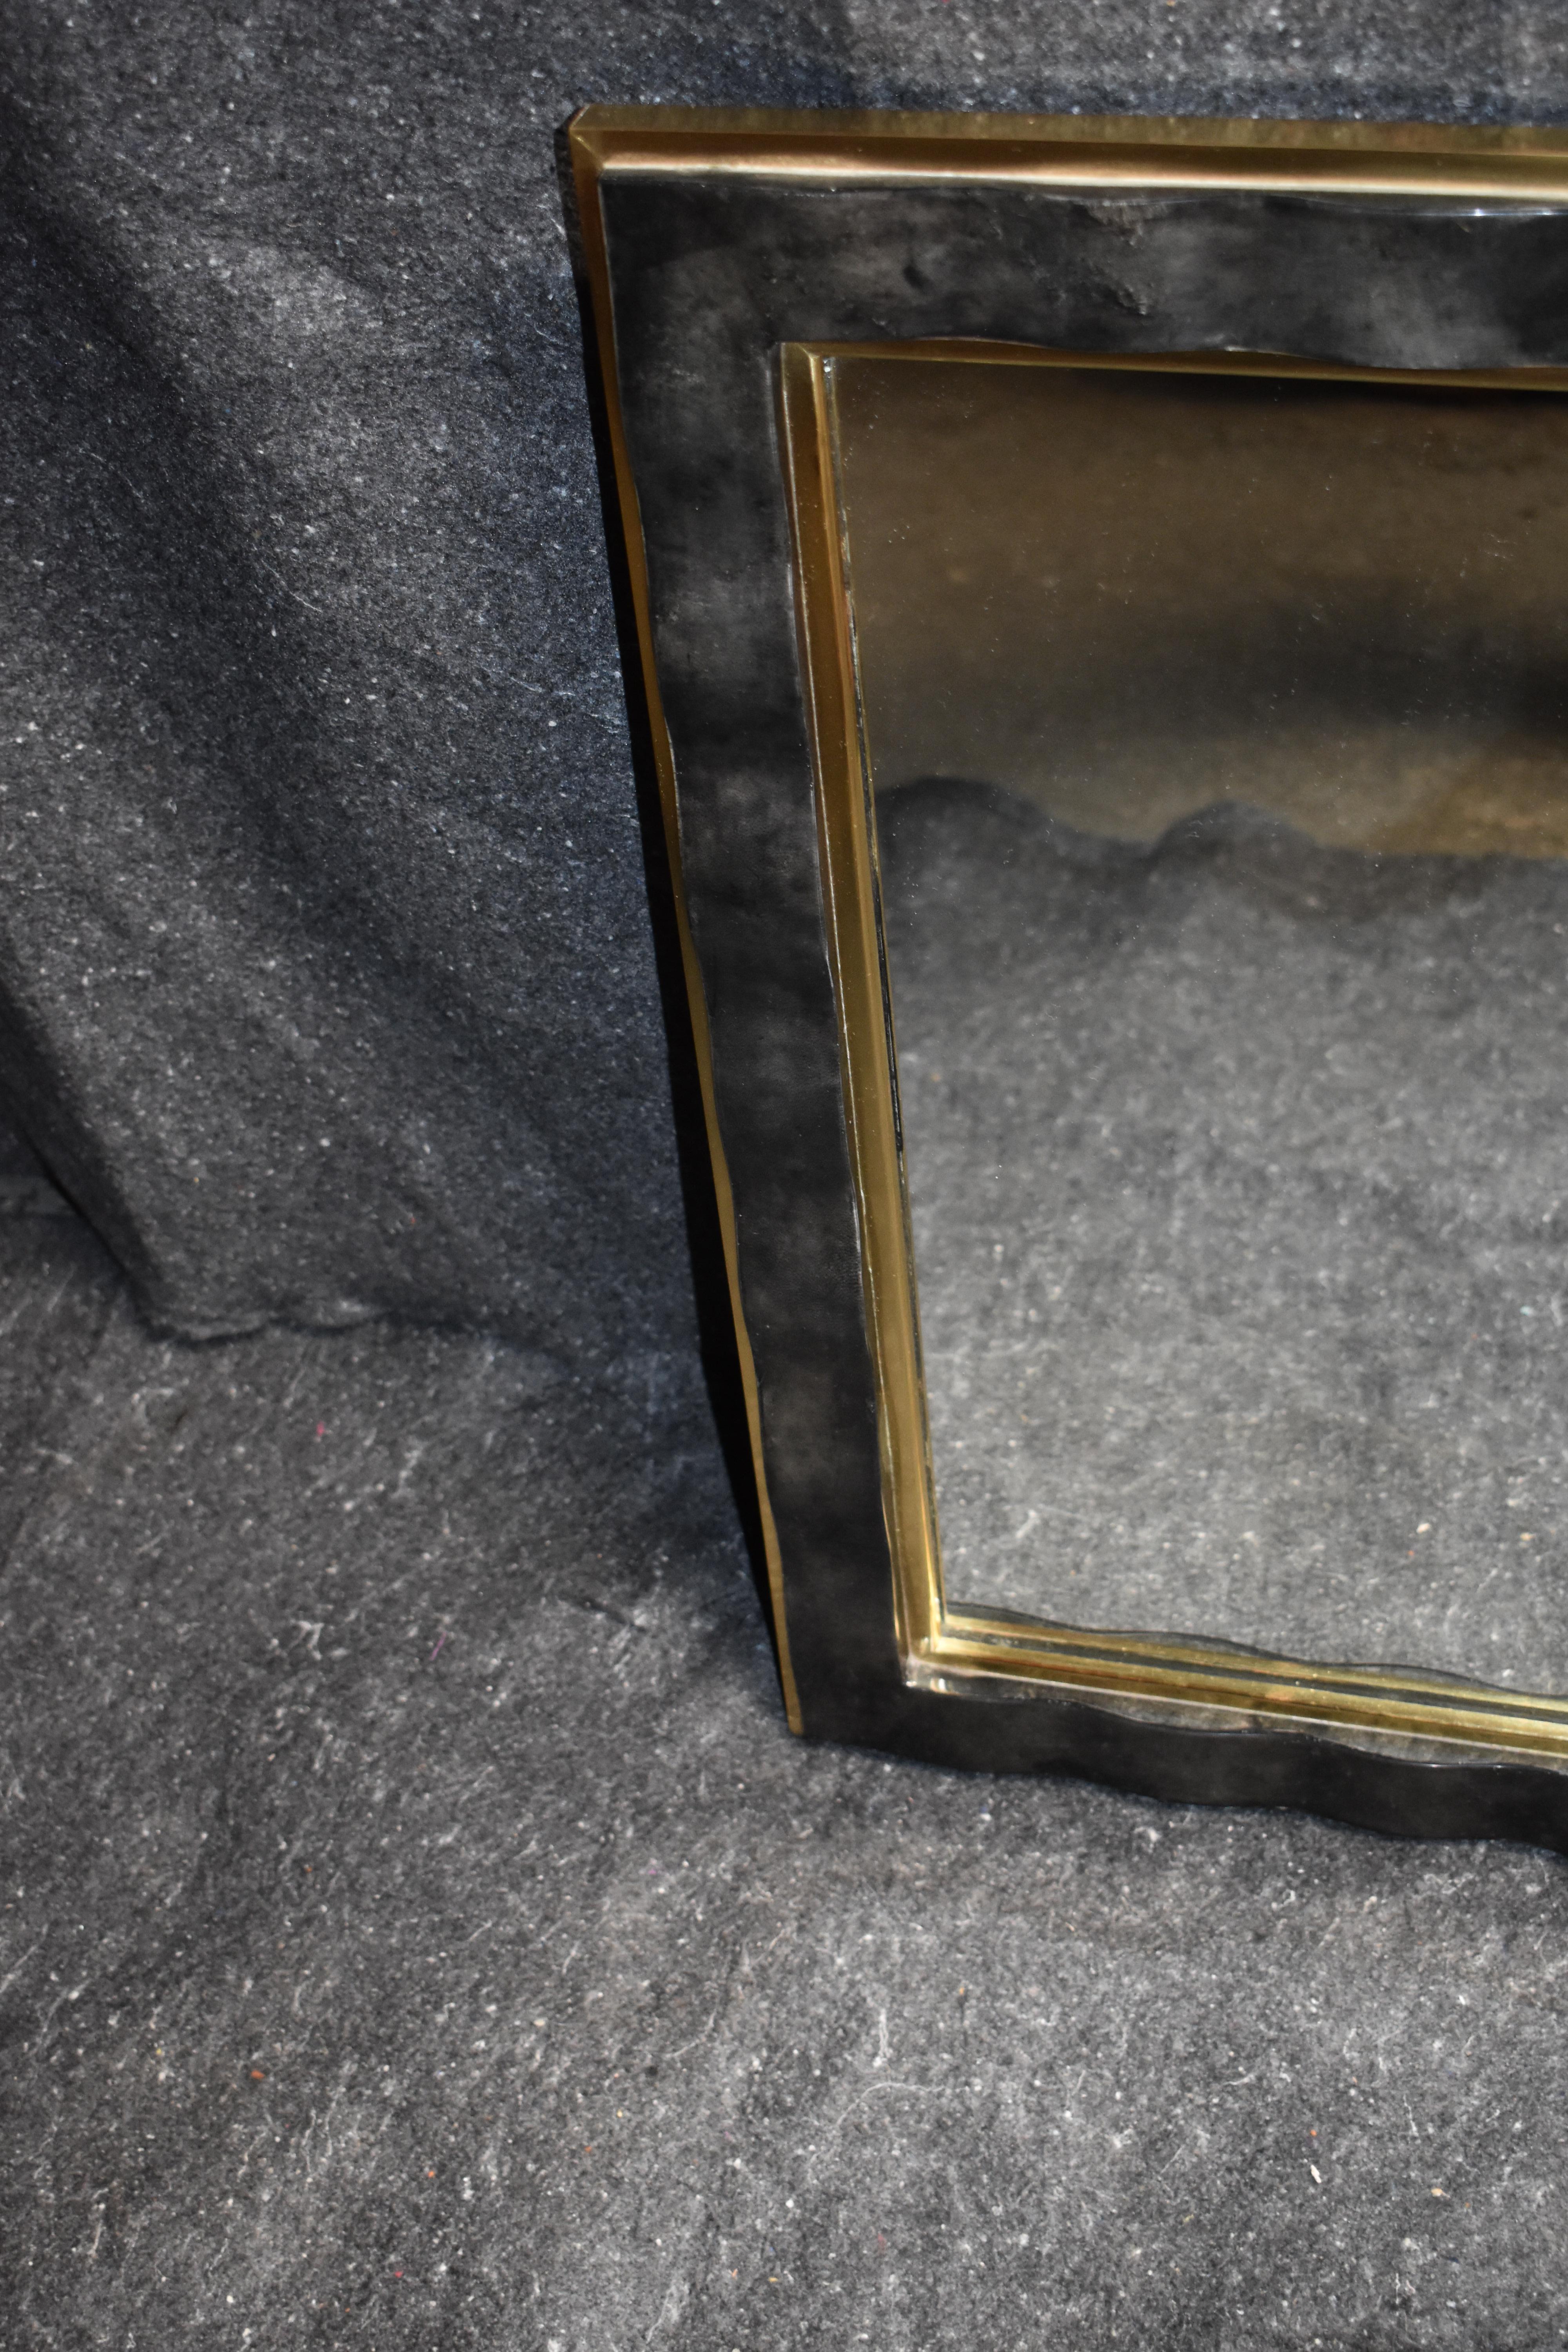 Rectangular mirror cover with goatskin and brass frame and detail.
Parchment is in varying shades of light and dark charcoal. (High gloss polyester resin filled finish).